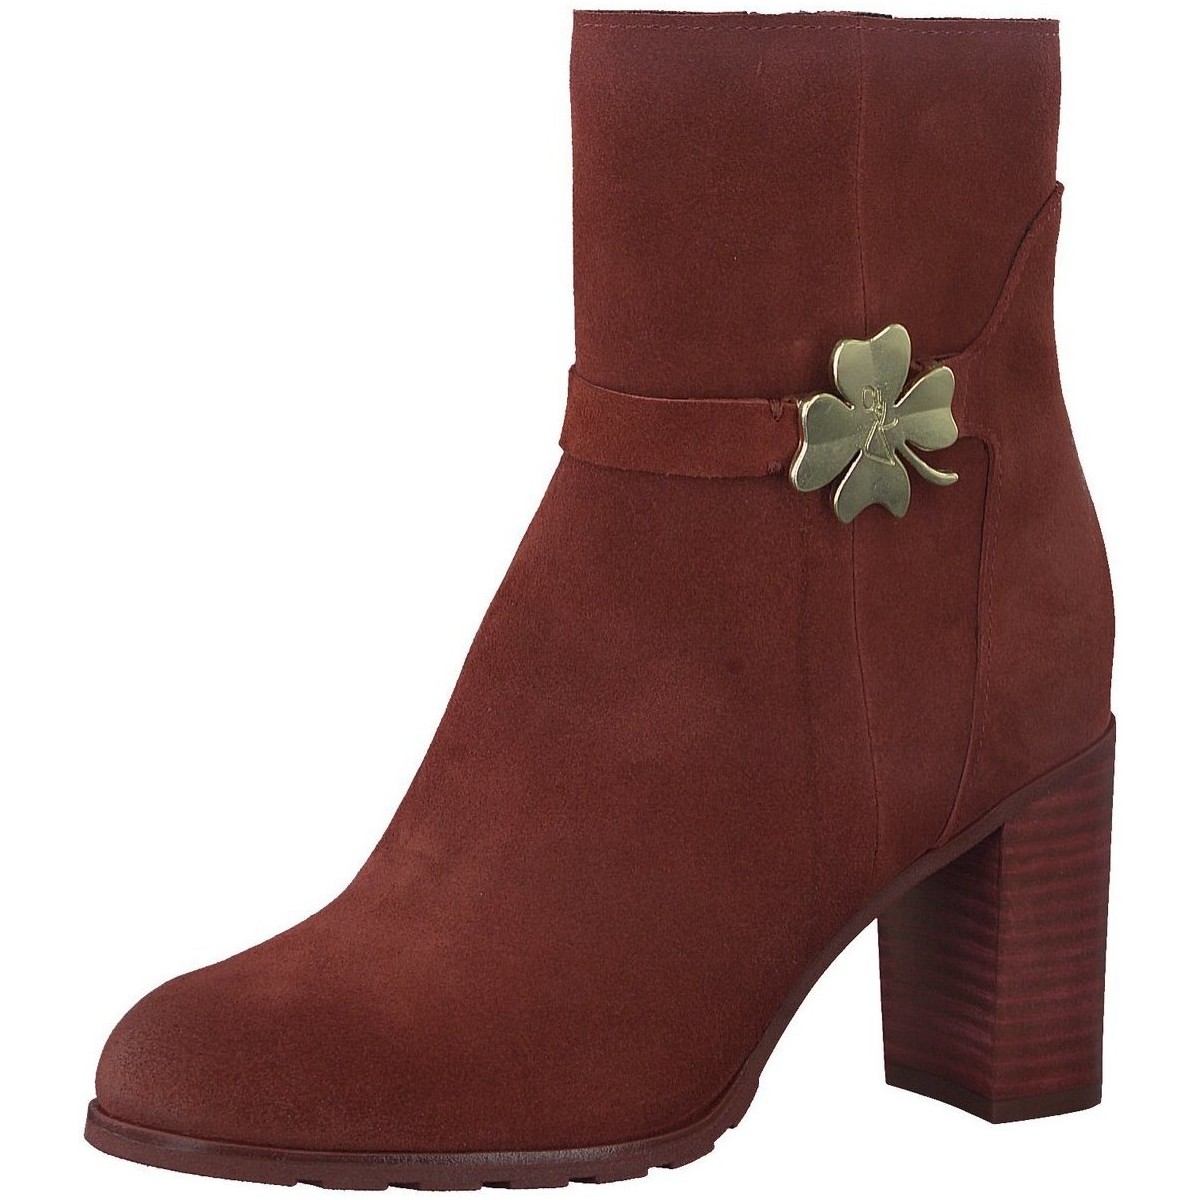 Chaussures Femme Bottes Marco Tozzi  Rouge